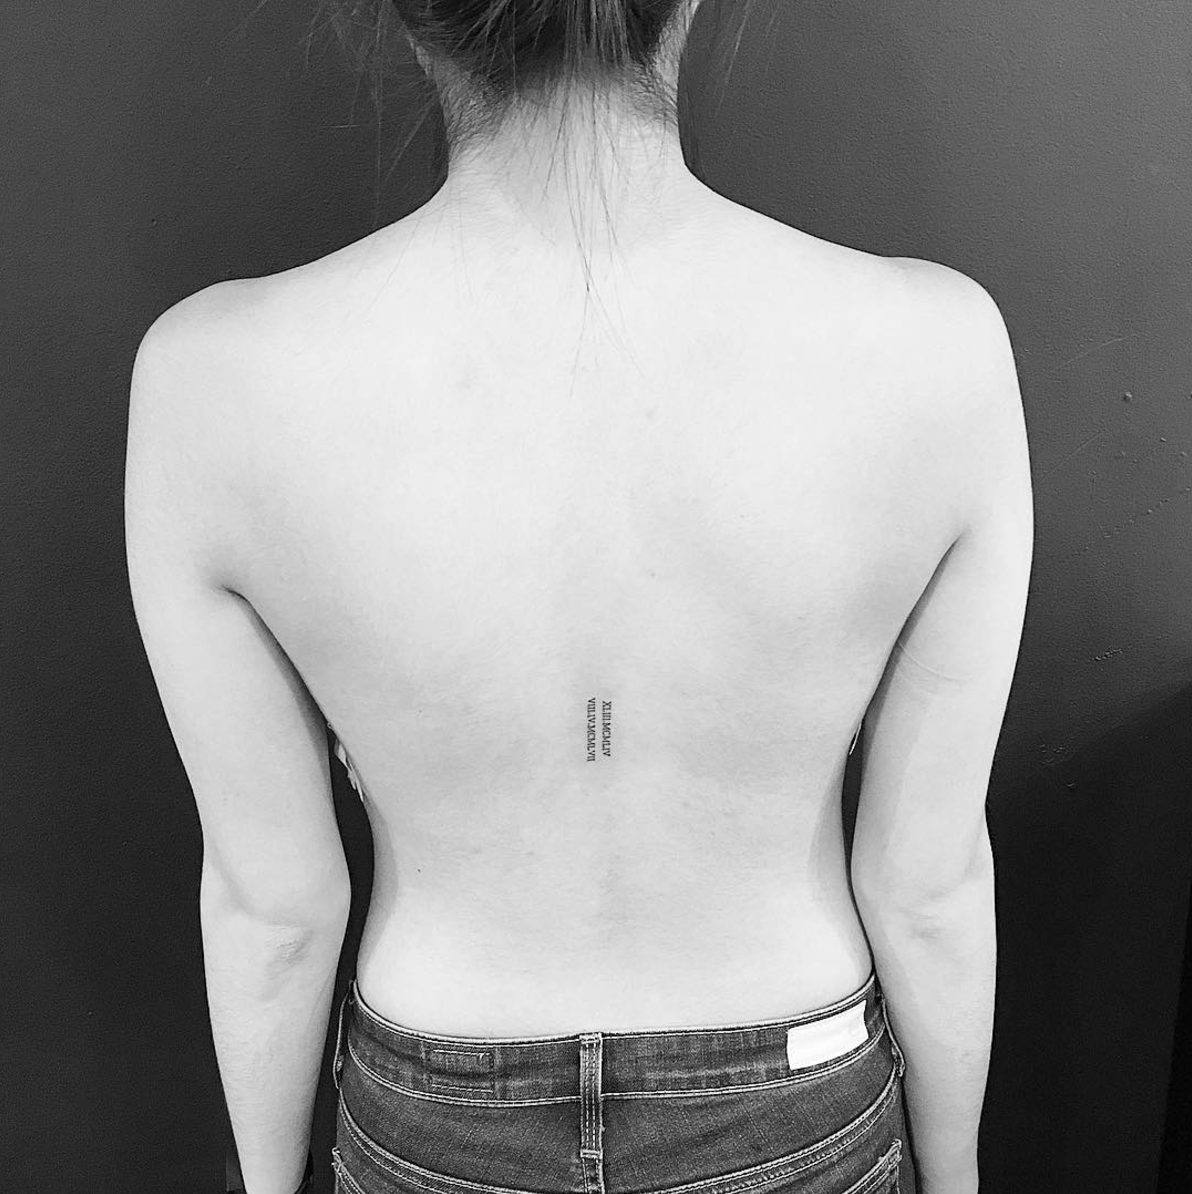 Beguiling Easy Small Back Tattoo - Small Back Tattoos - Small Tattoos -  MomCanvas